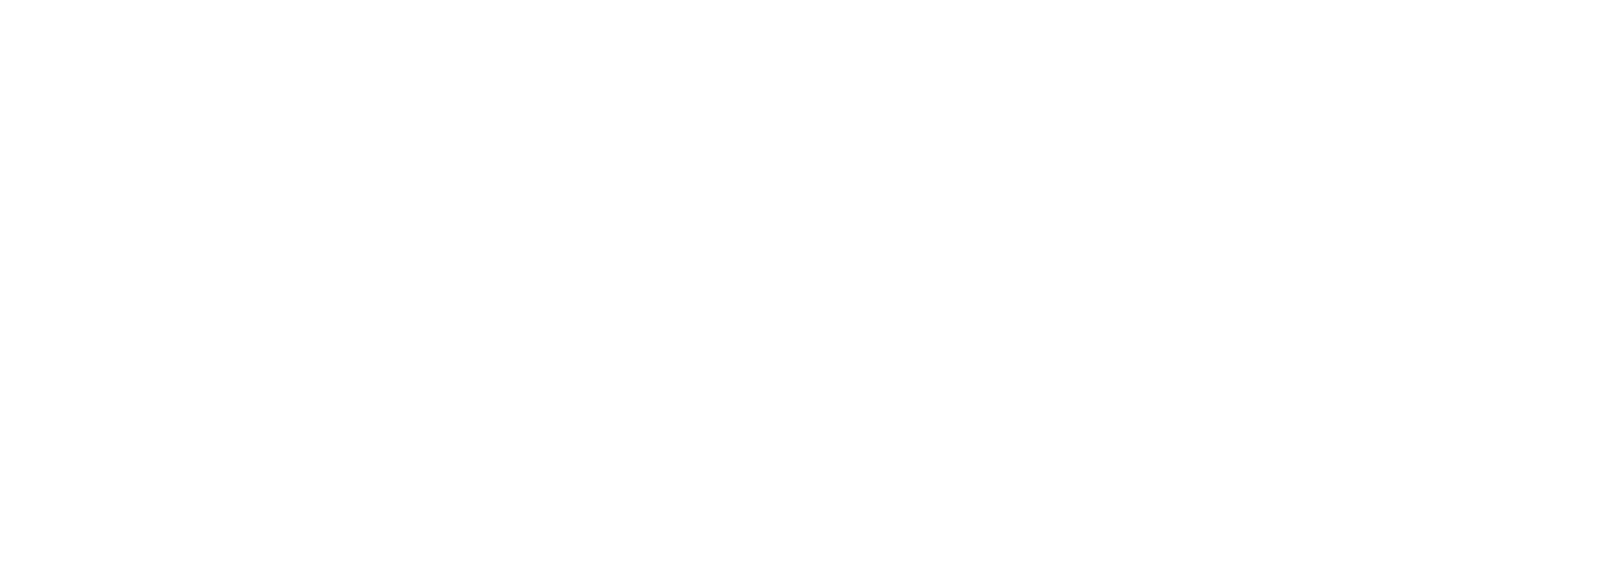 The doc group logo png